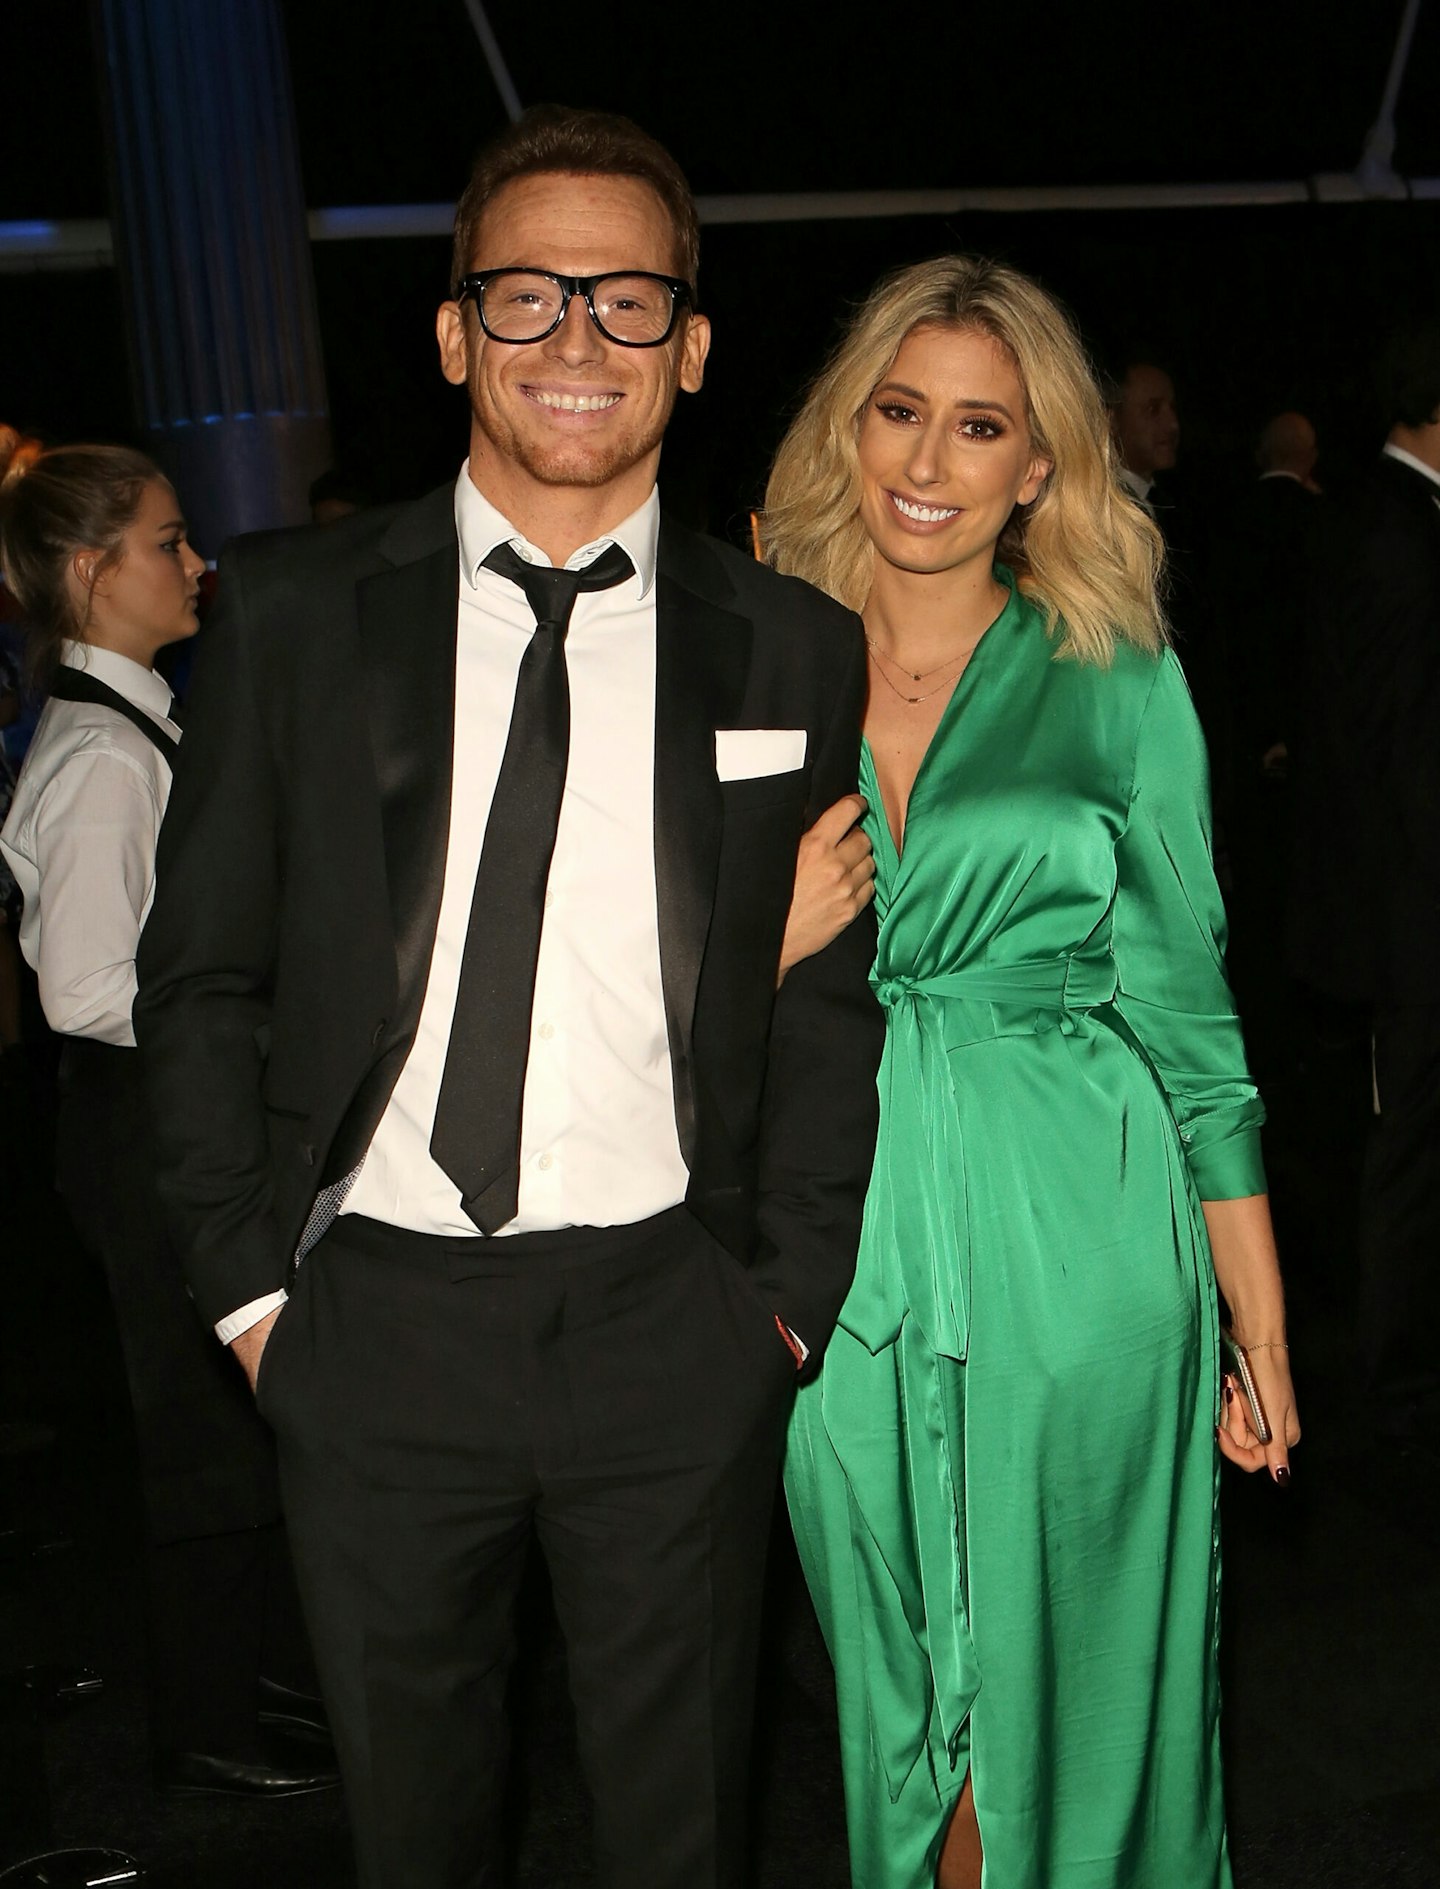 joe swash wearing a black suit and stacey solomon wearing a green satin dress together